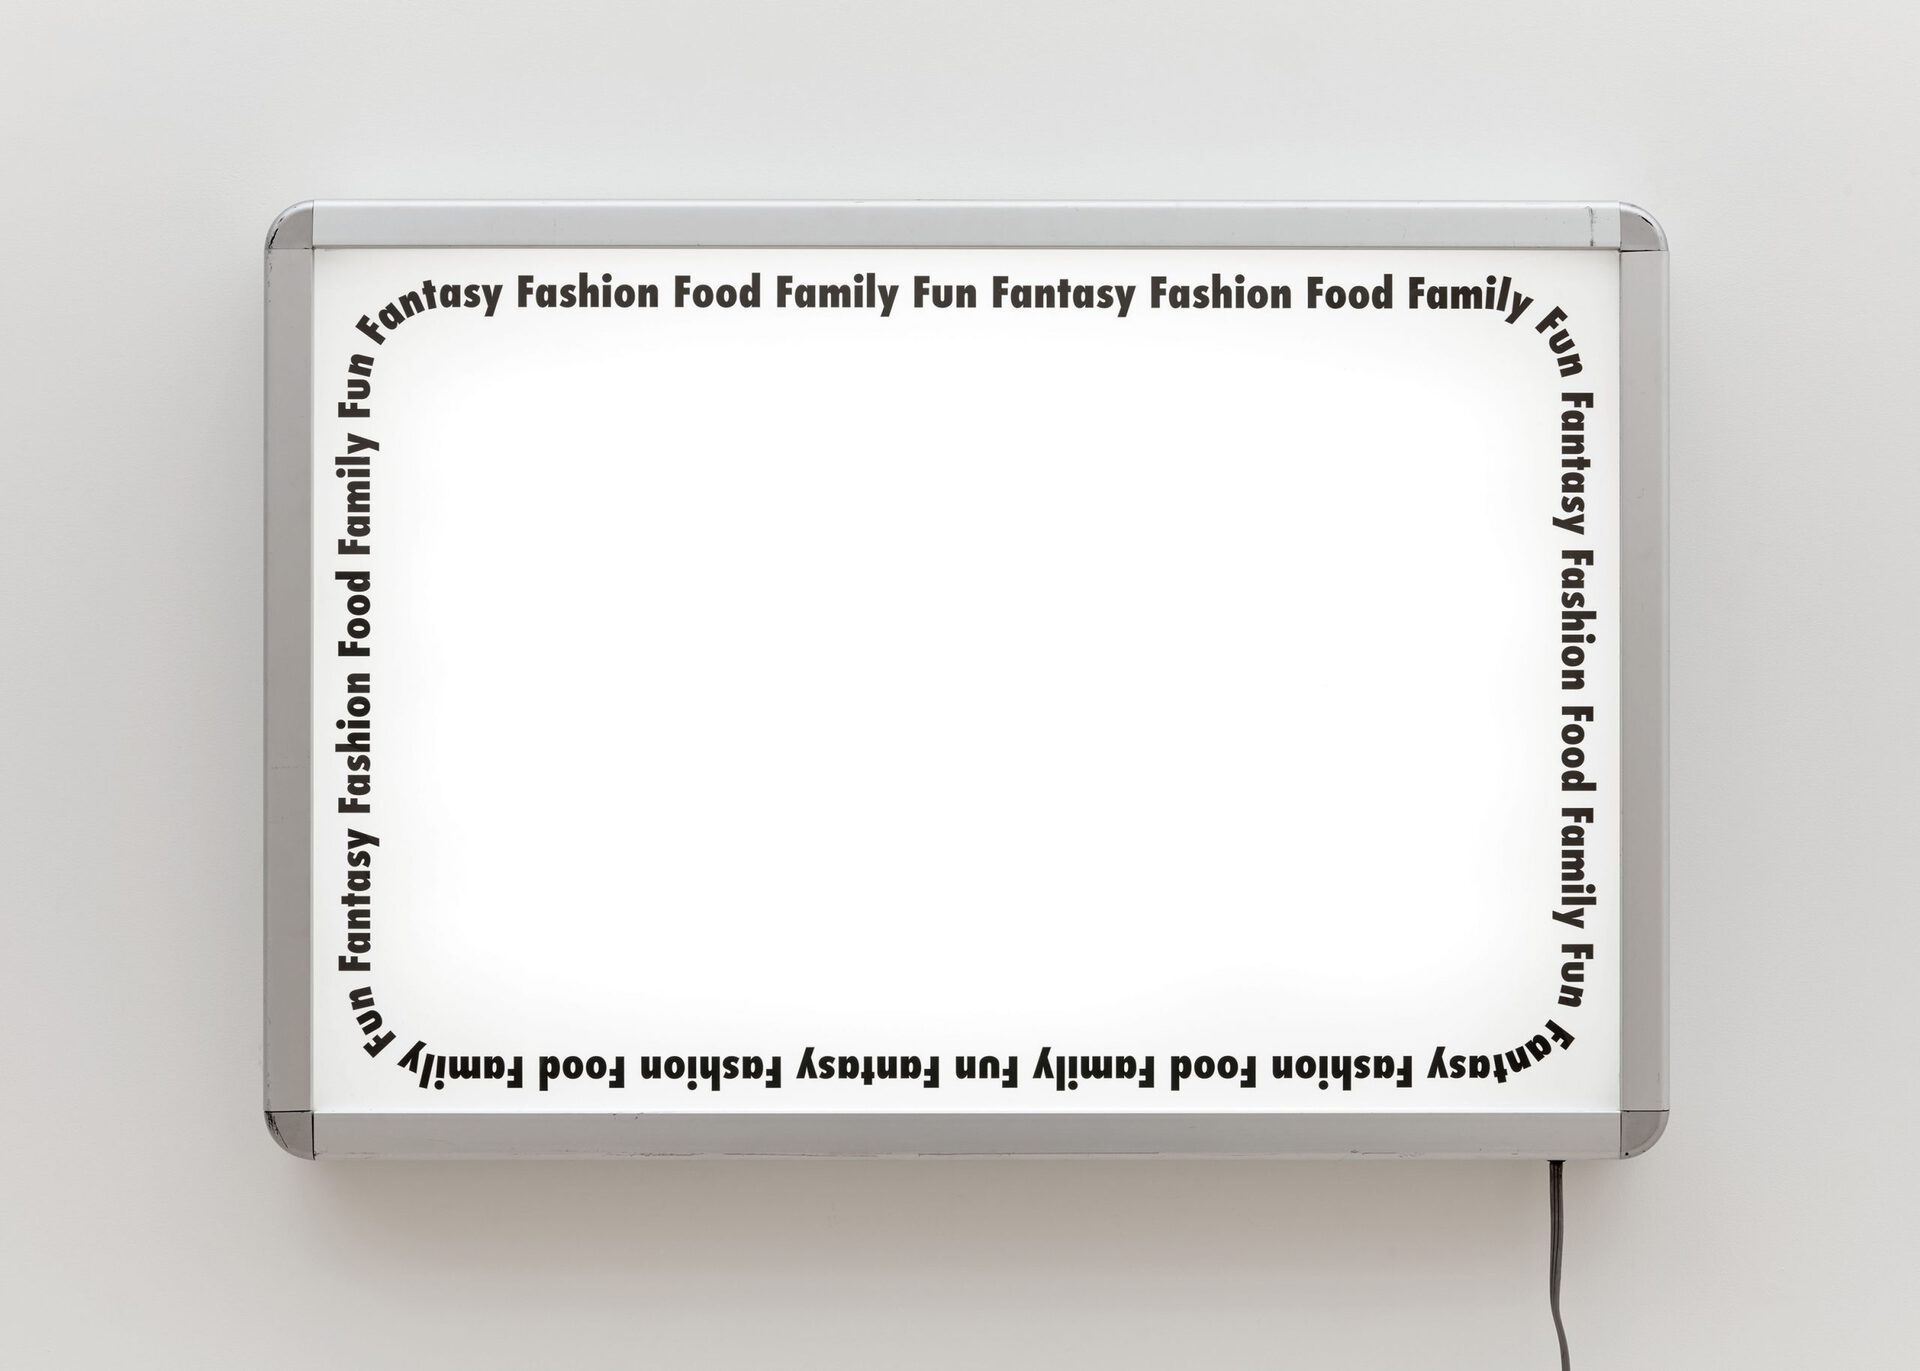 Ellen Schafer, Shiny Happy People (Laughing) (Fantasy, fashion, food, family, fun), 2020, Illuminated sign, digital print on backlit film, 36 x 24 inches